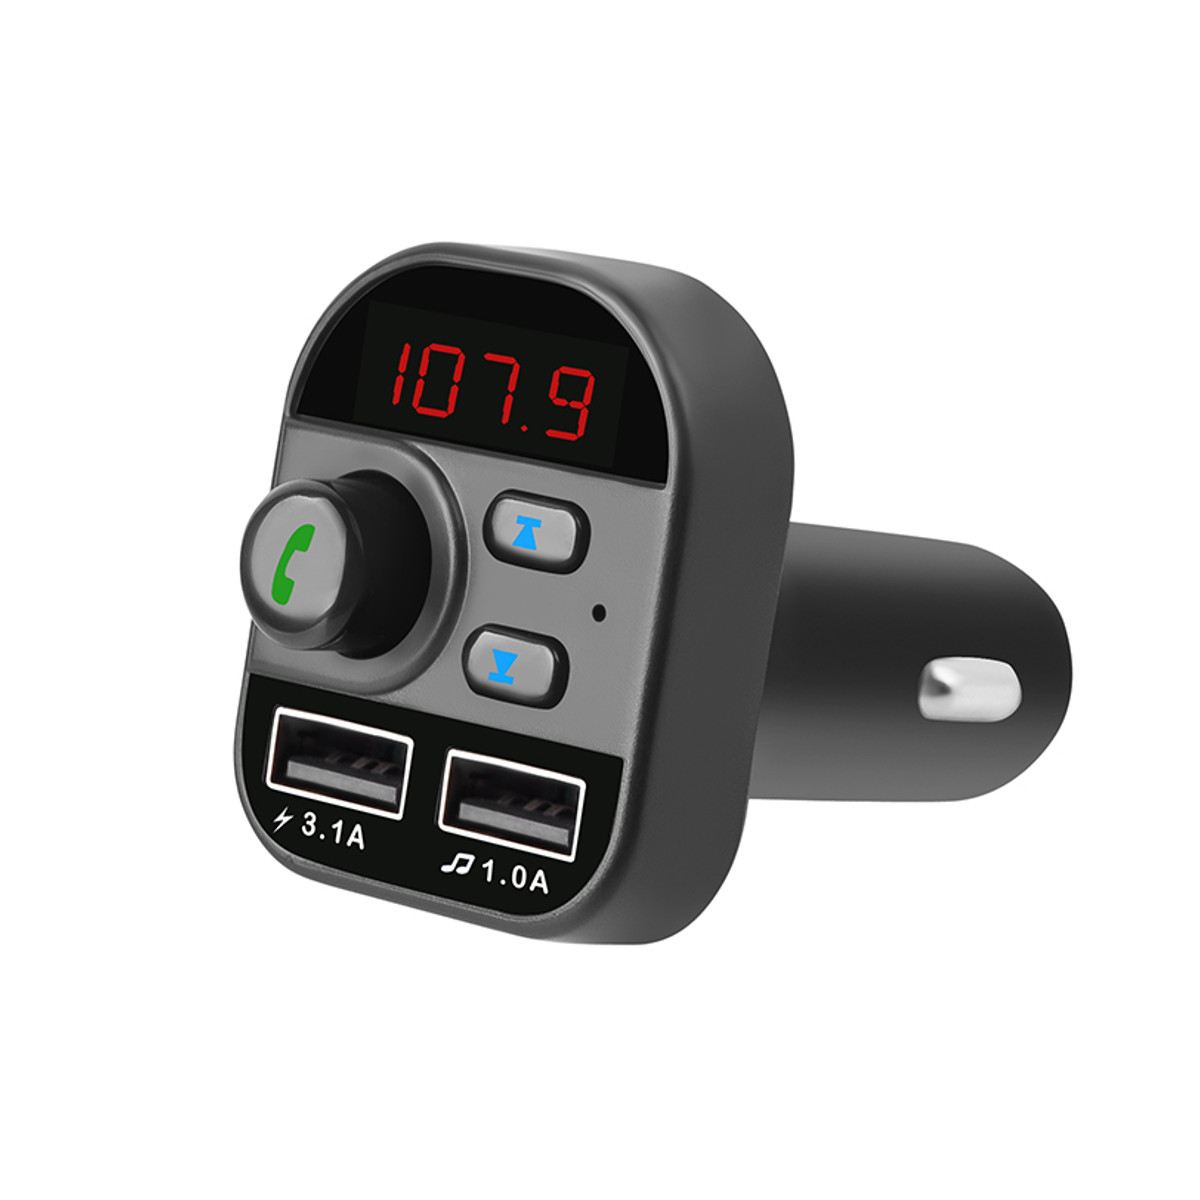 

Bakeey Handsfree Wireless Bluetooth 5.0 FM Transmitter Car Charger LCD MP3 Player USB Charger 3.1A Car Accessories Hands